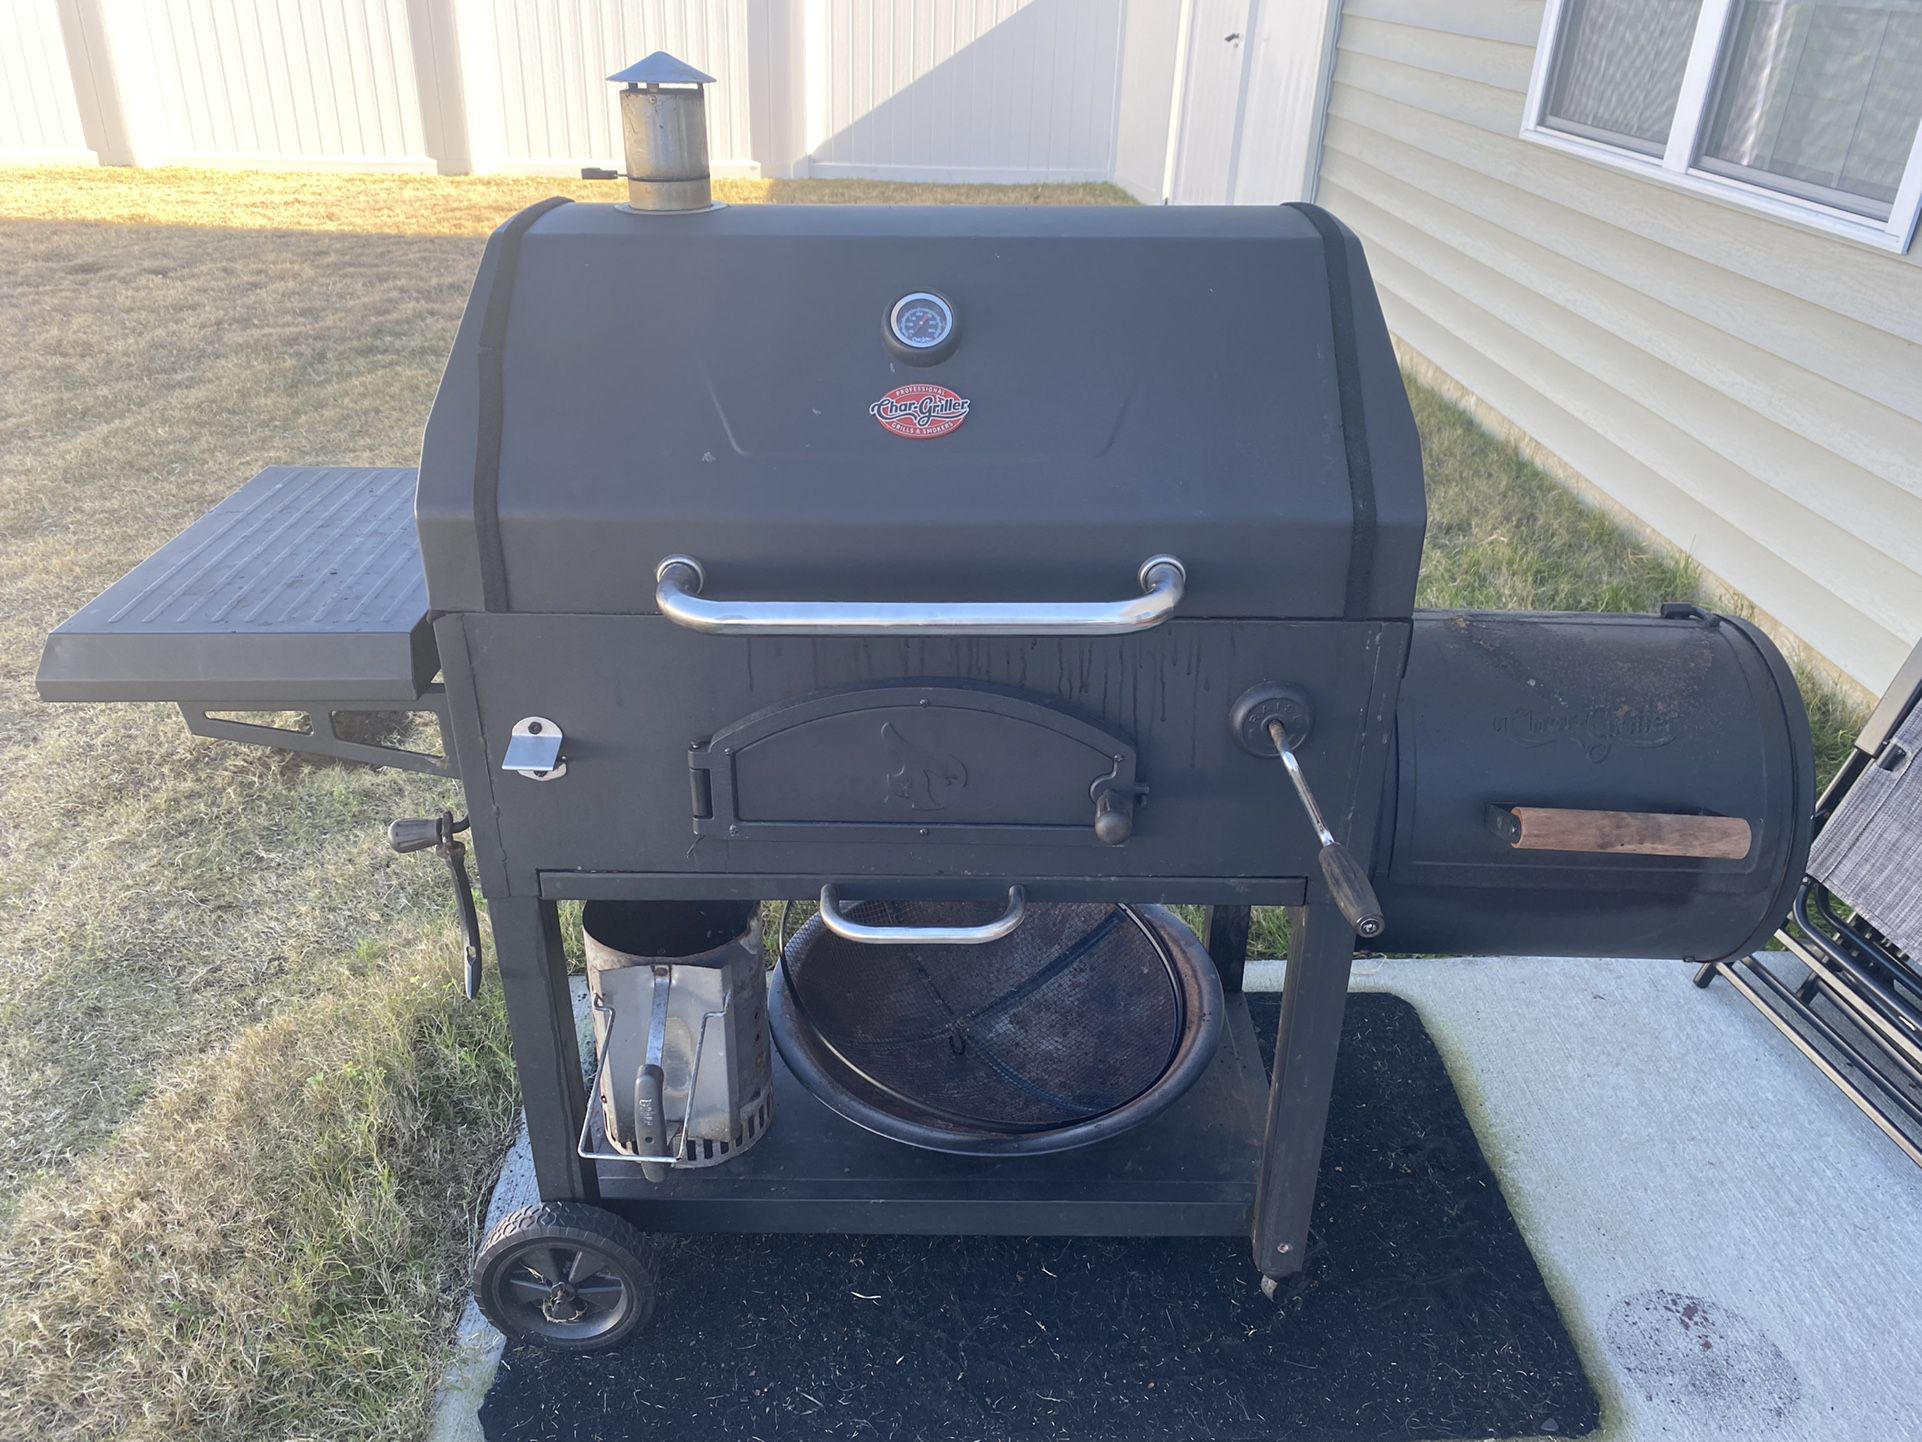 Charcoal Grill & Smoker 